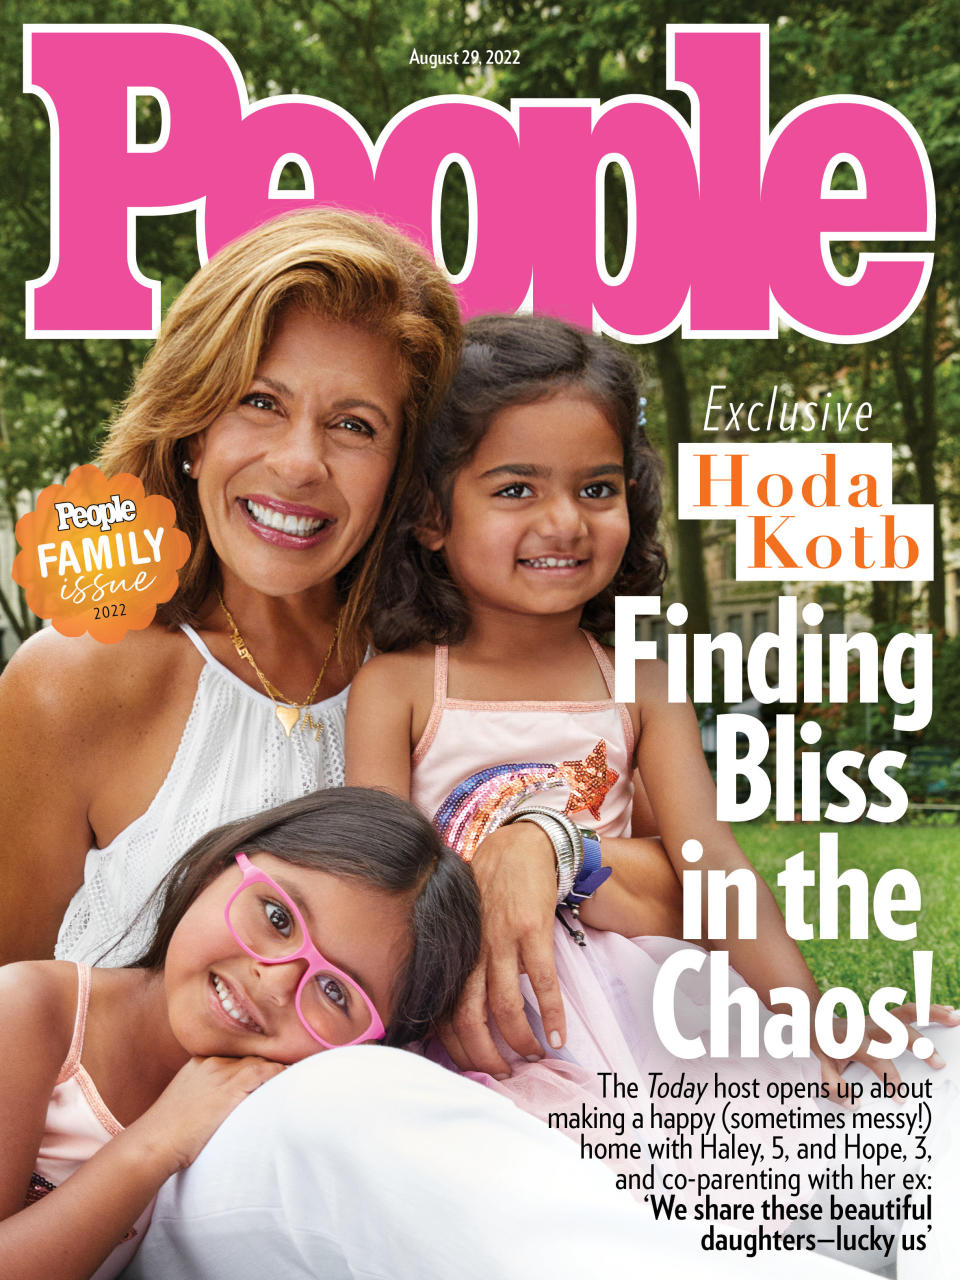 Hoda Kotb with her daughters on the cover of People magazine. (Courtesy of People)